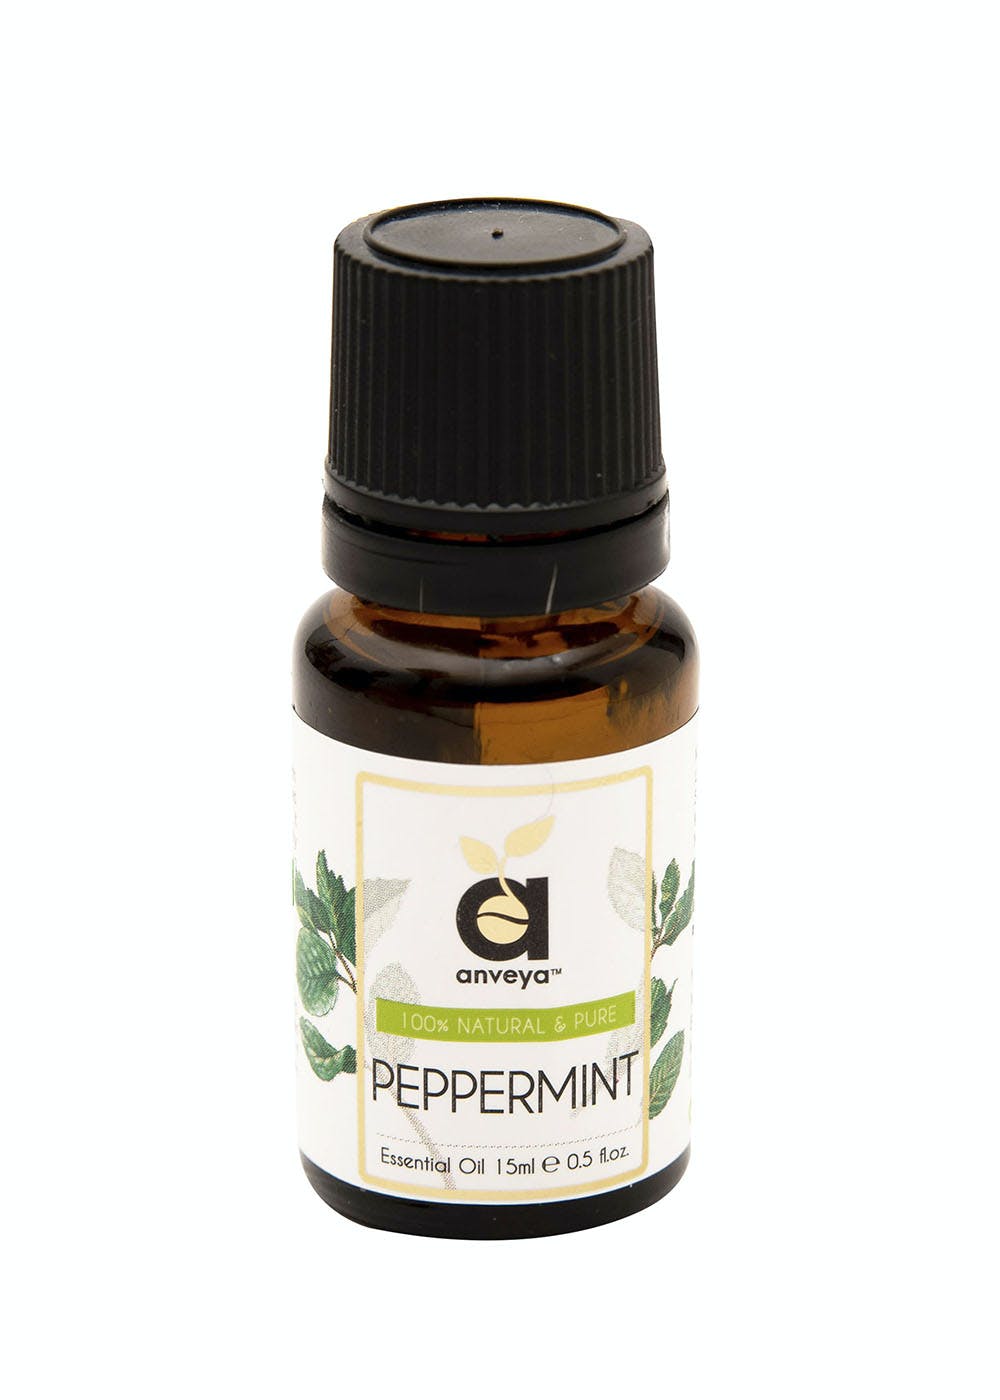 Peppermint Essential Oil, 100% Natural, 15ml - For Hair, Skin, Face, Steam, Cold & Diffuser